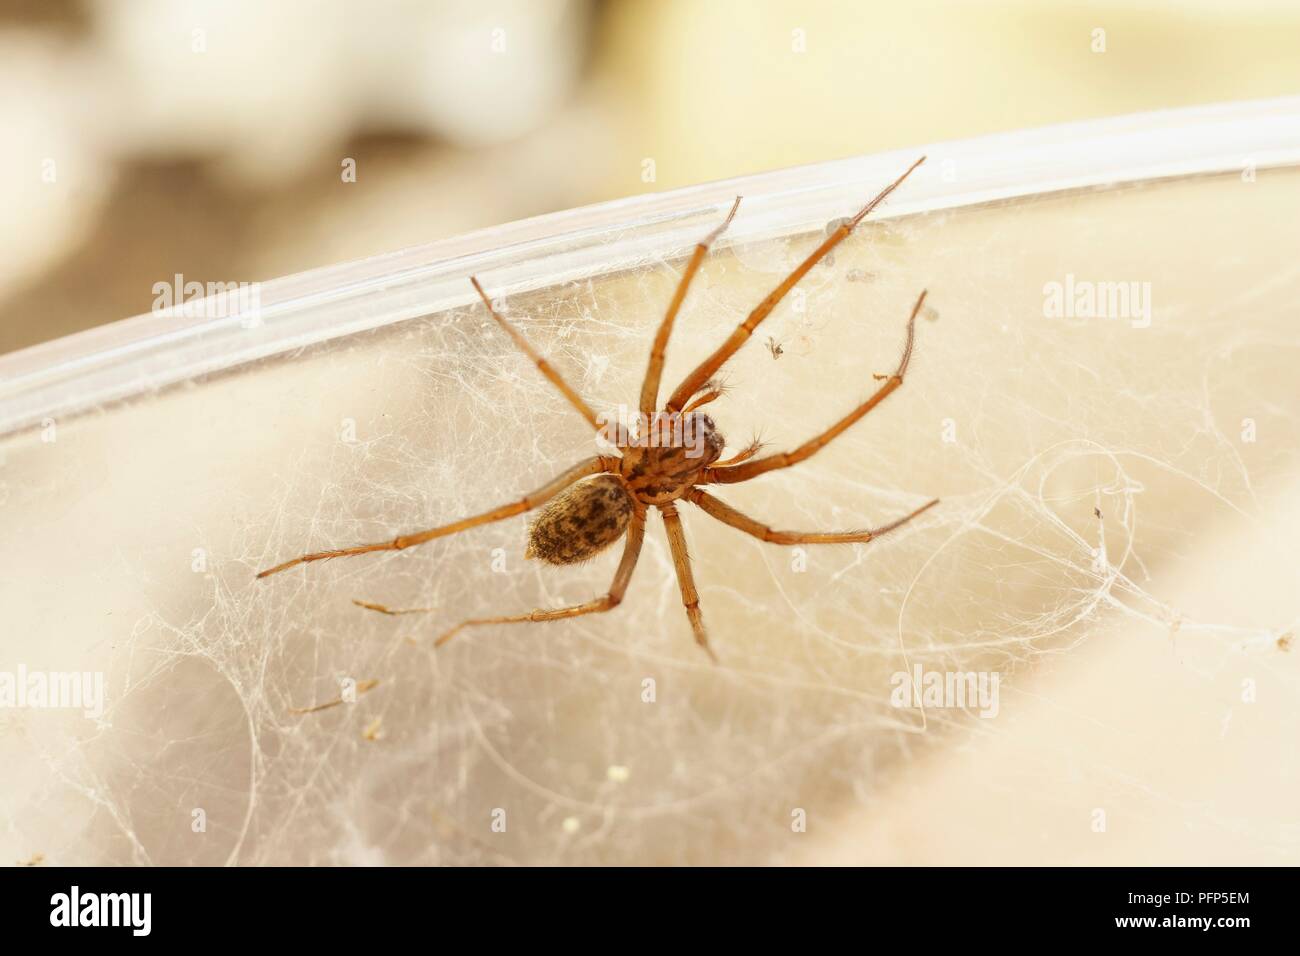 House spider (Tegenaria sp.) crawling along the edge of a plastic bowl, weaving a web Stock Photo